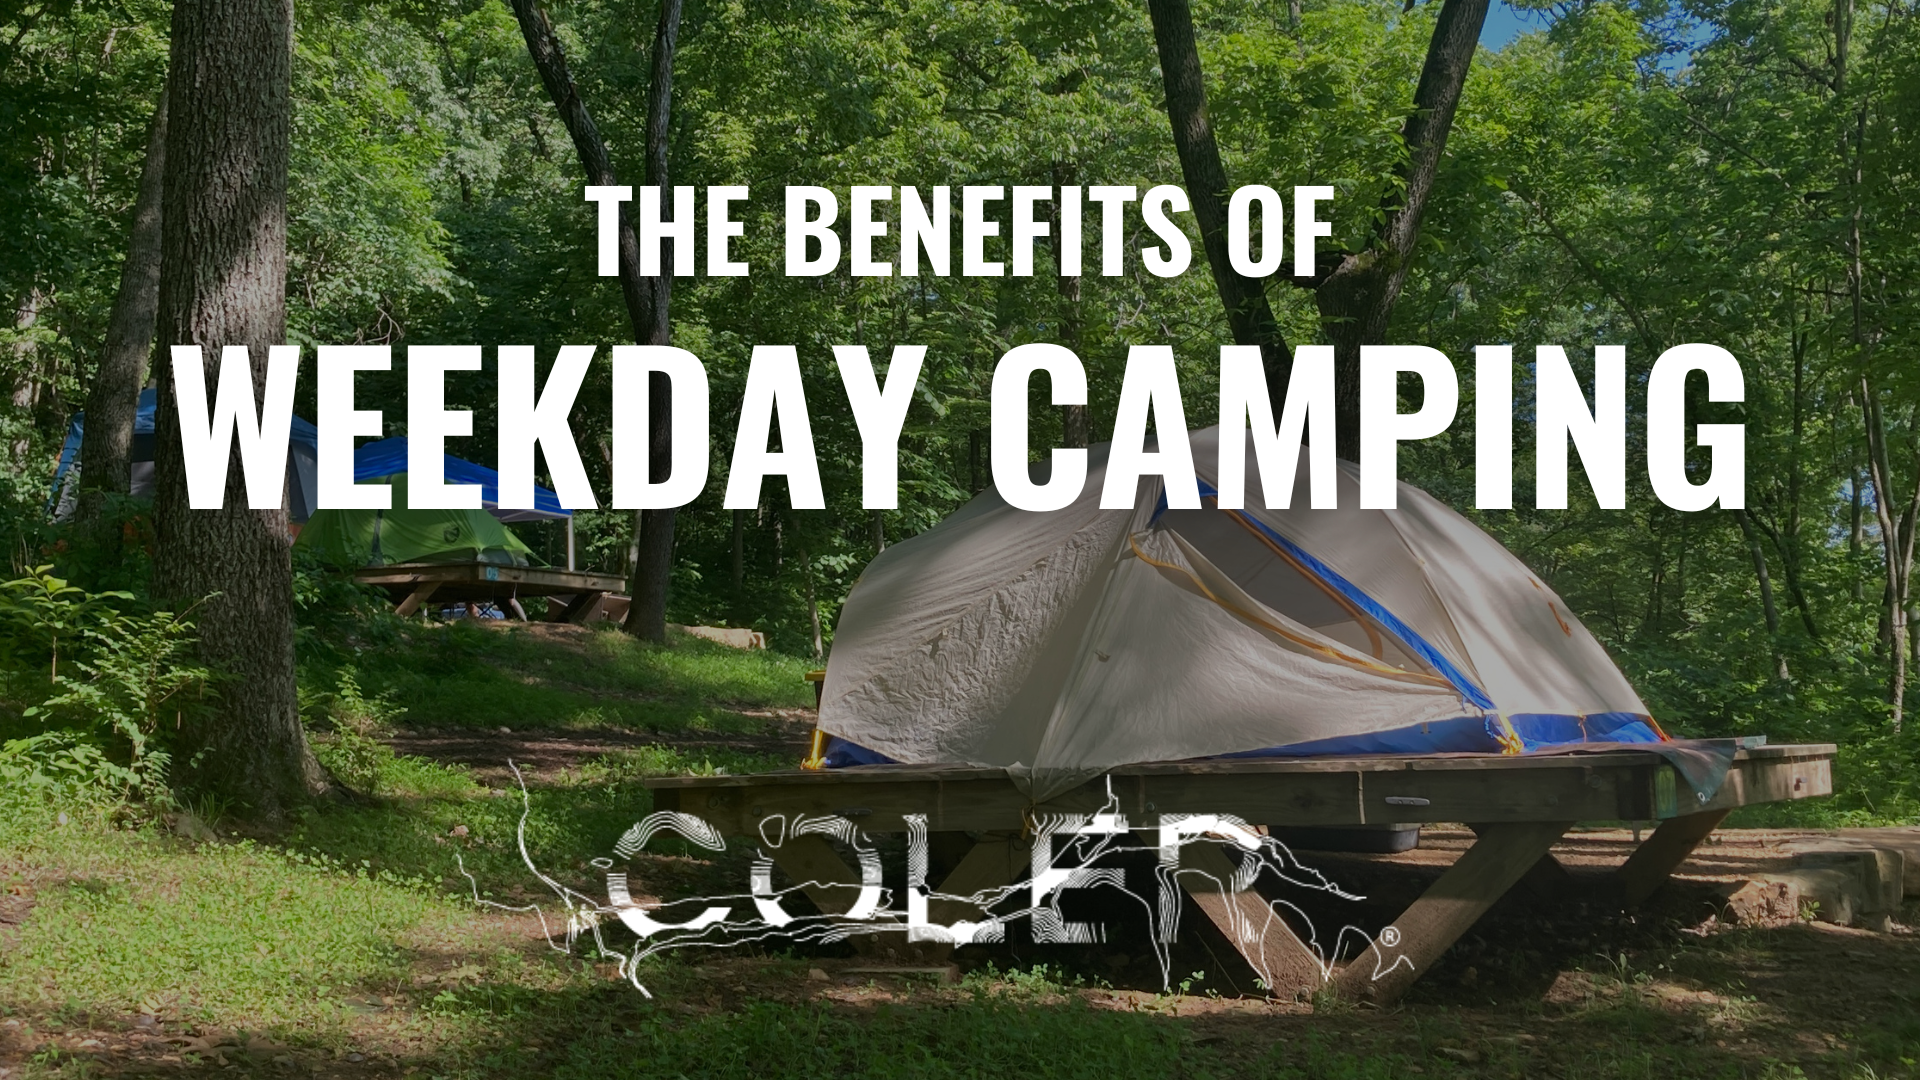 camping tent on a wooden platform in a the woods with "The Benefits of Weekday Camping at Coler" overlaid in white letters.